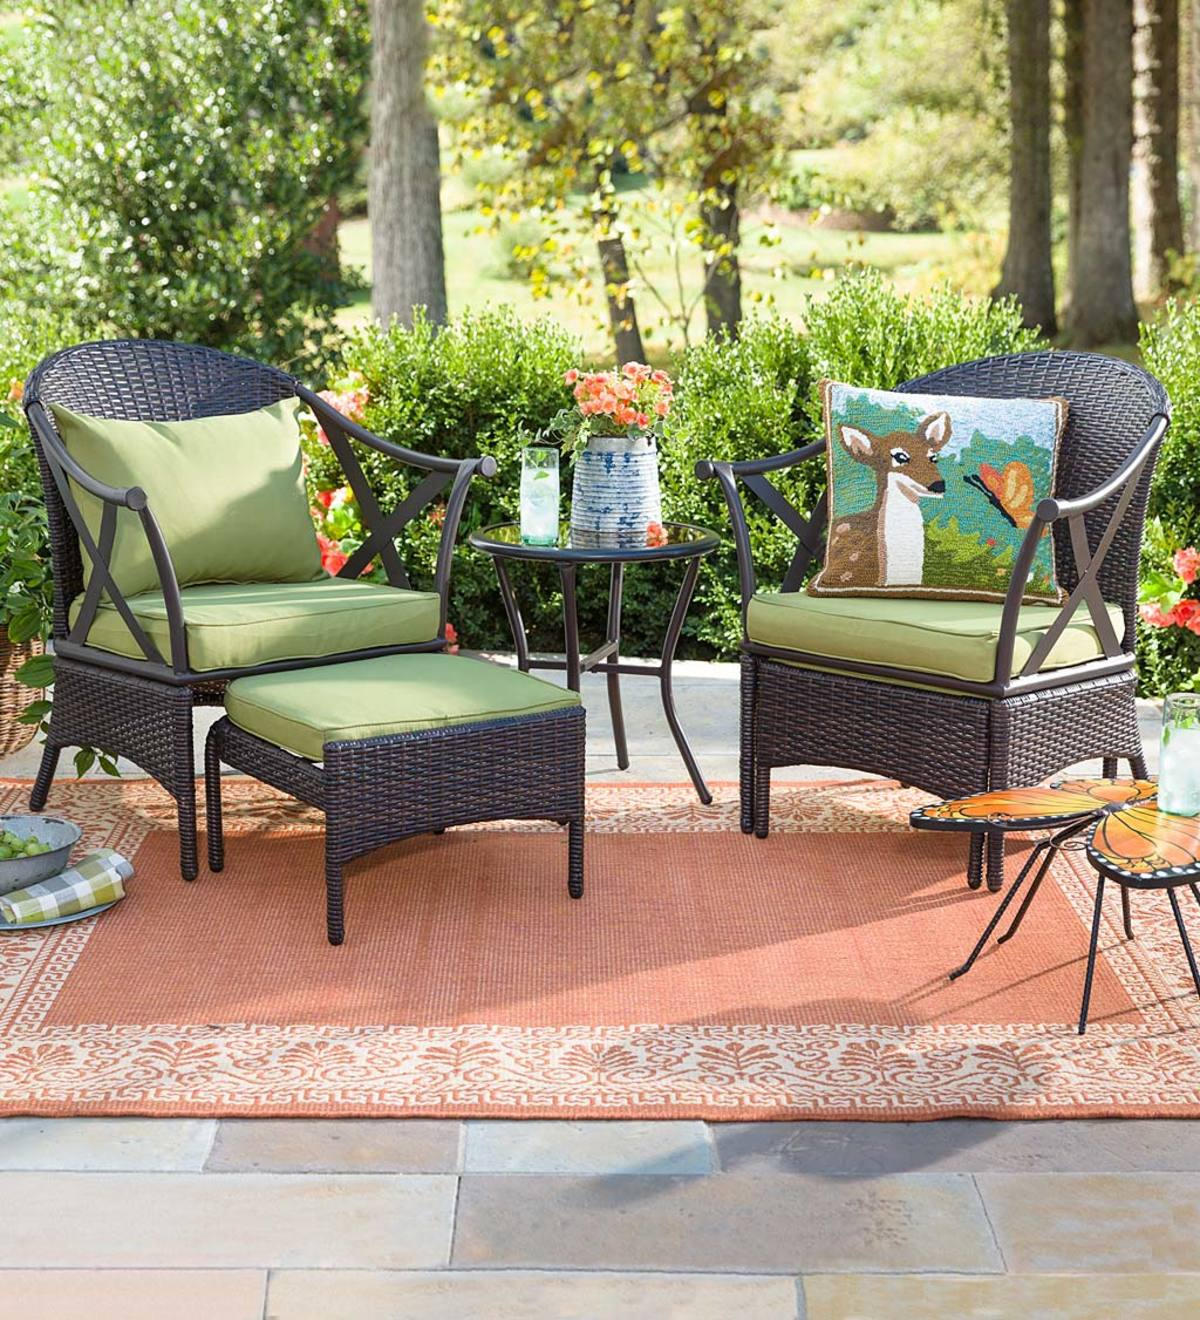 Wicker Patio Furniture Set With Cushions Plowhearth throughout proportions 1200 X 1320